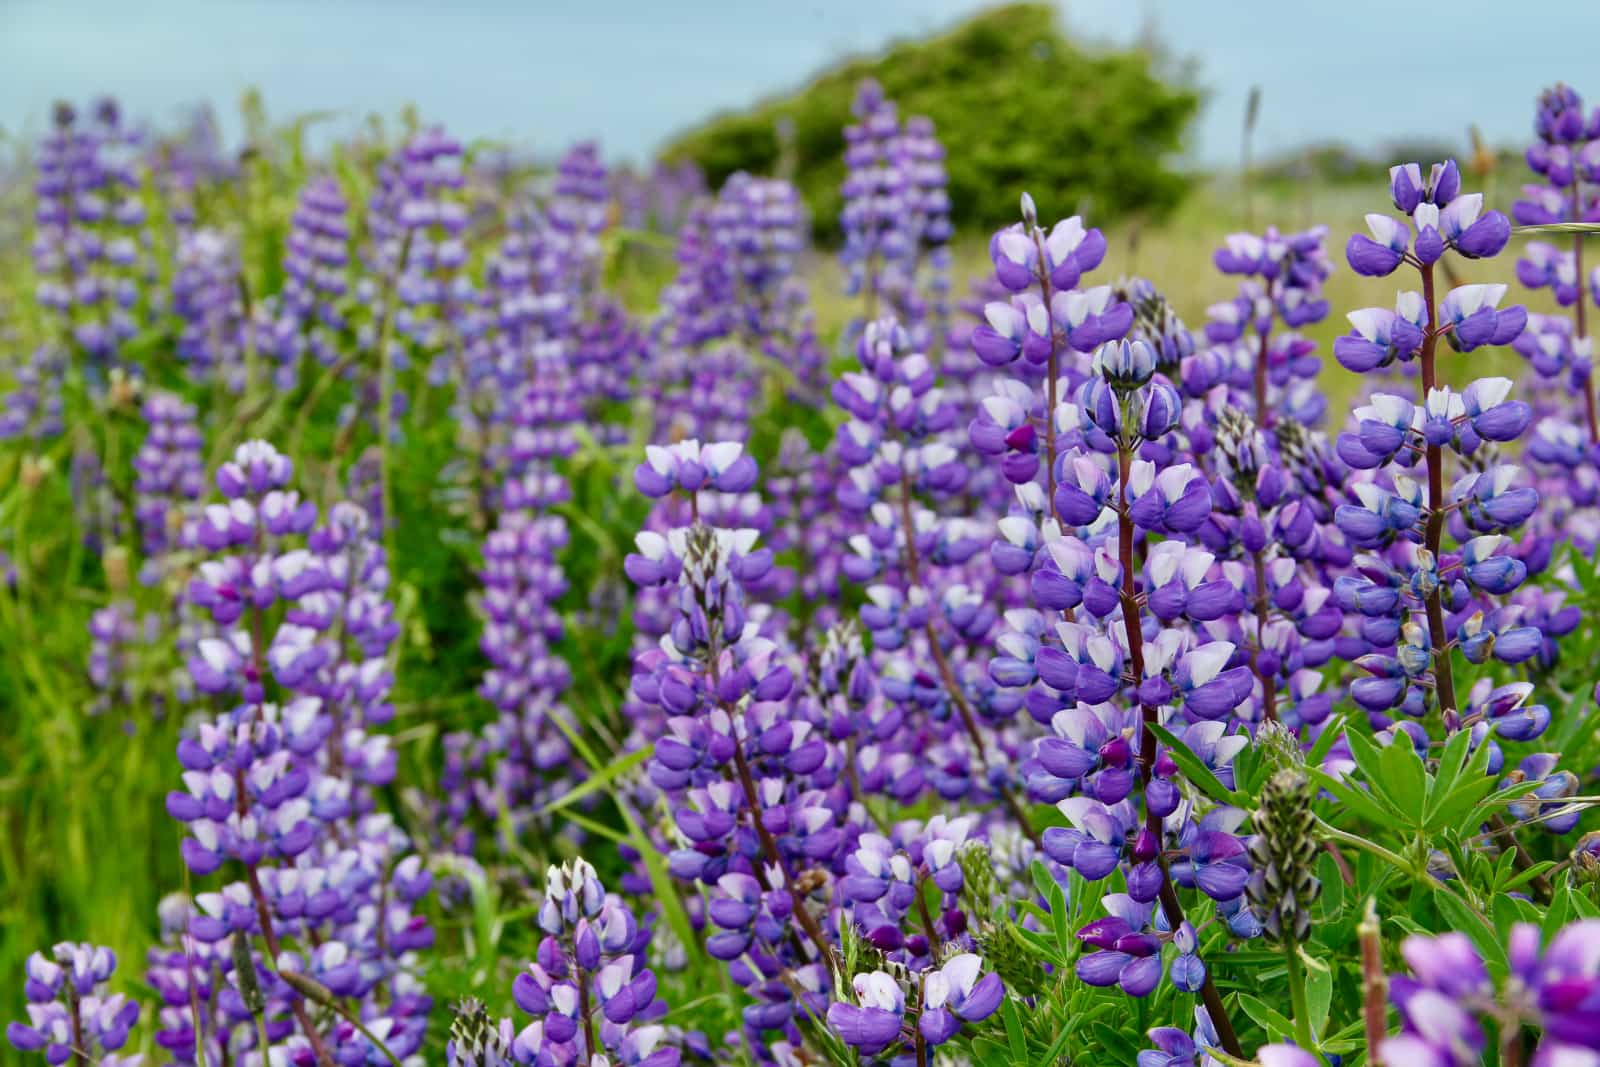 Numerous purple flowers in foreground with blue sky in background